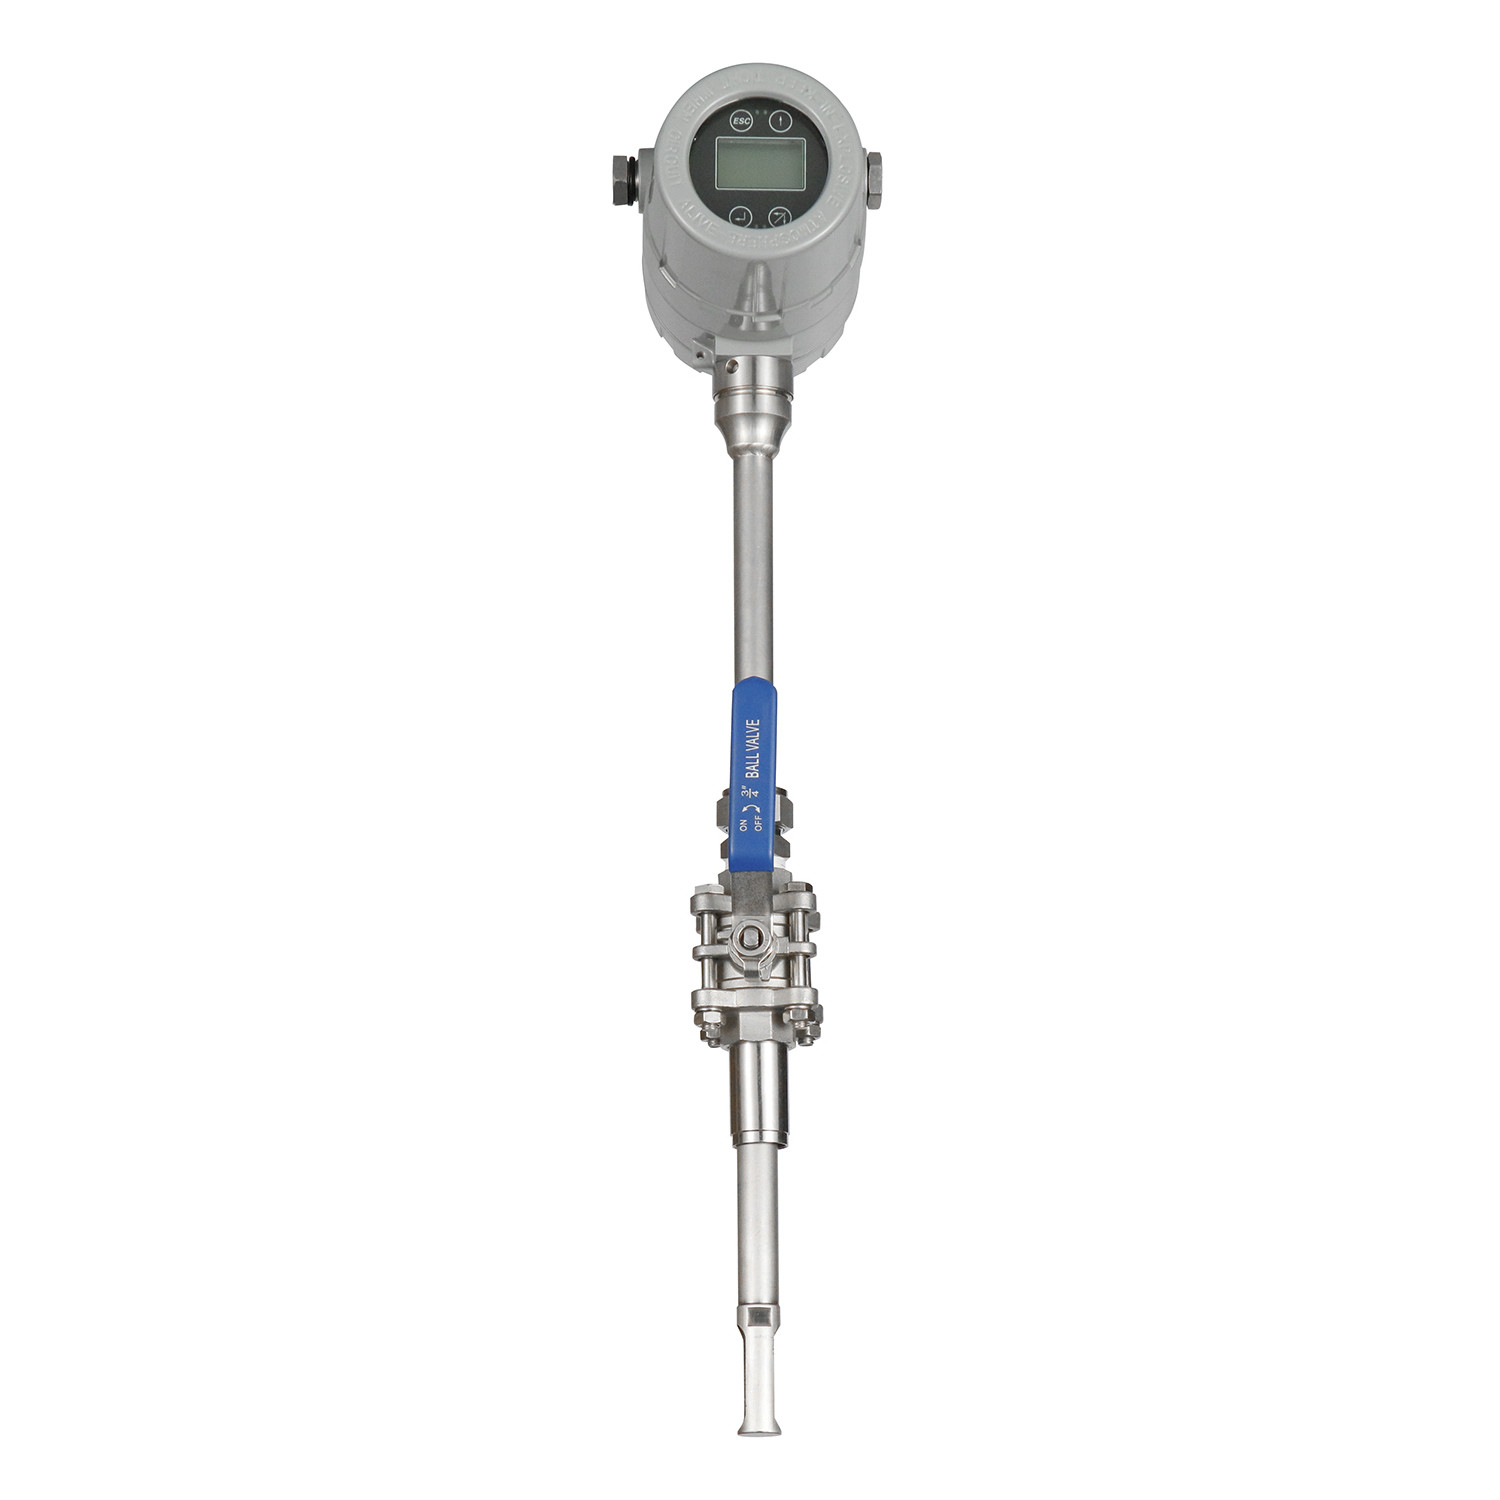 High quality thermal gas flow meter